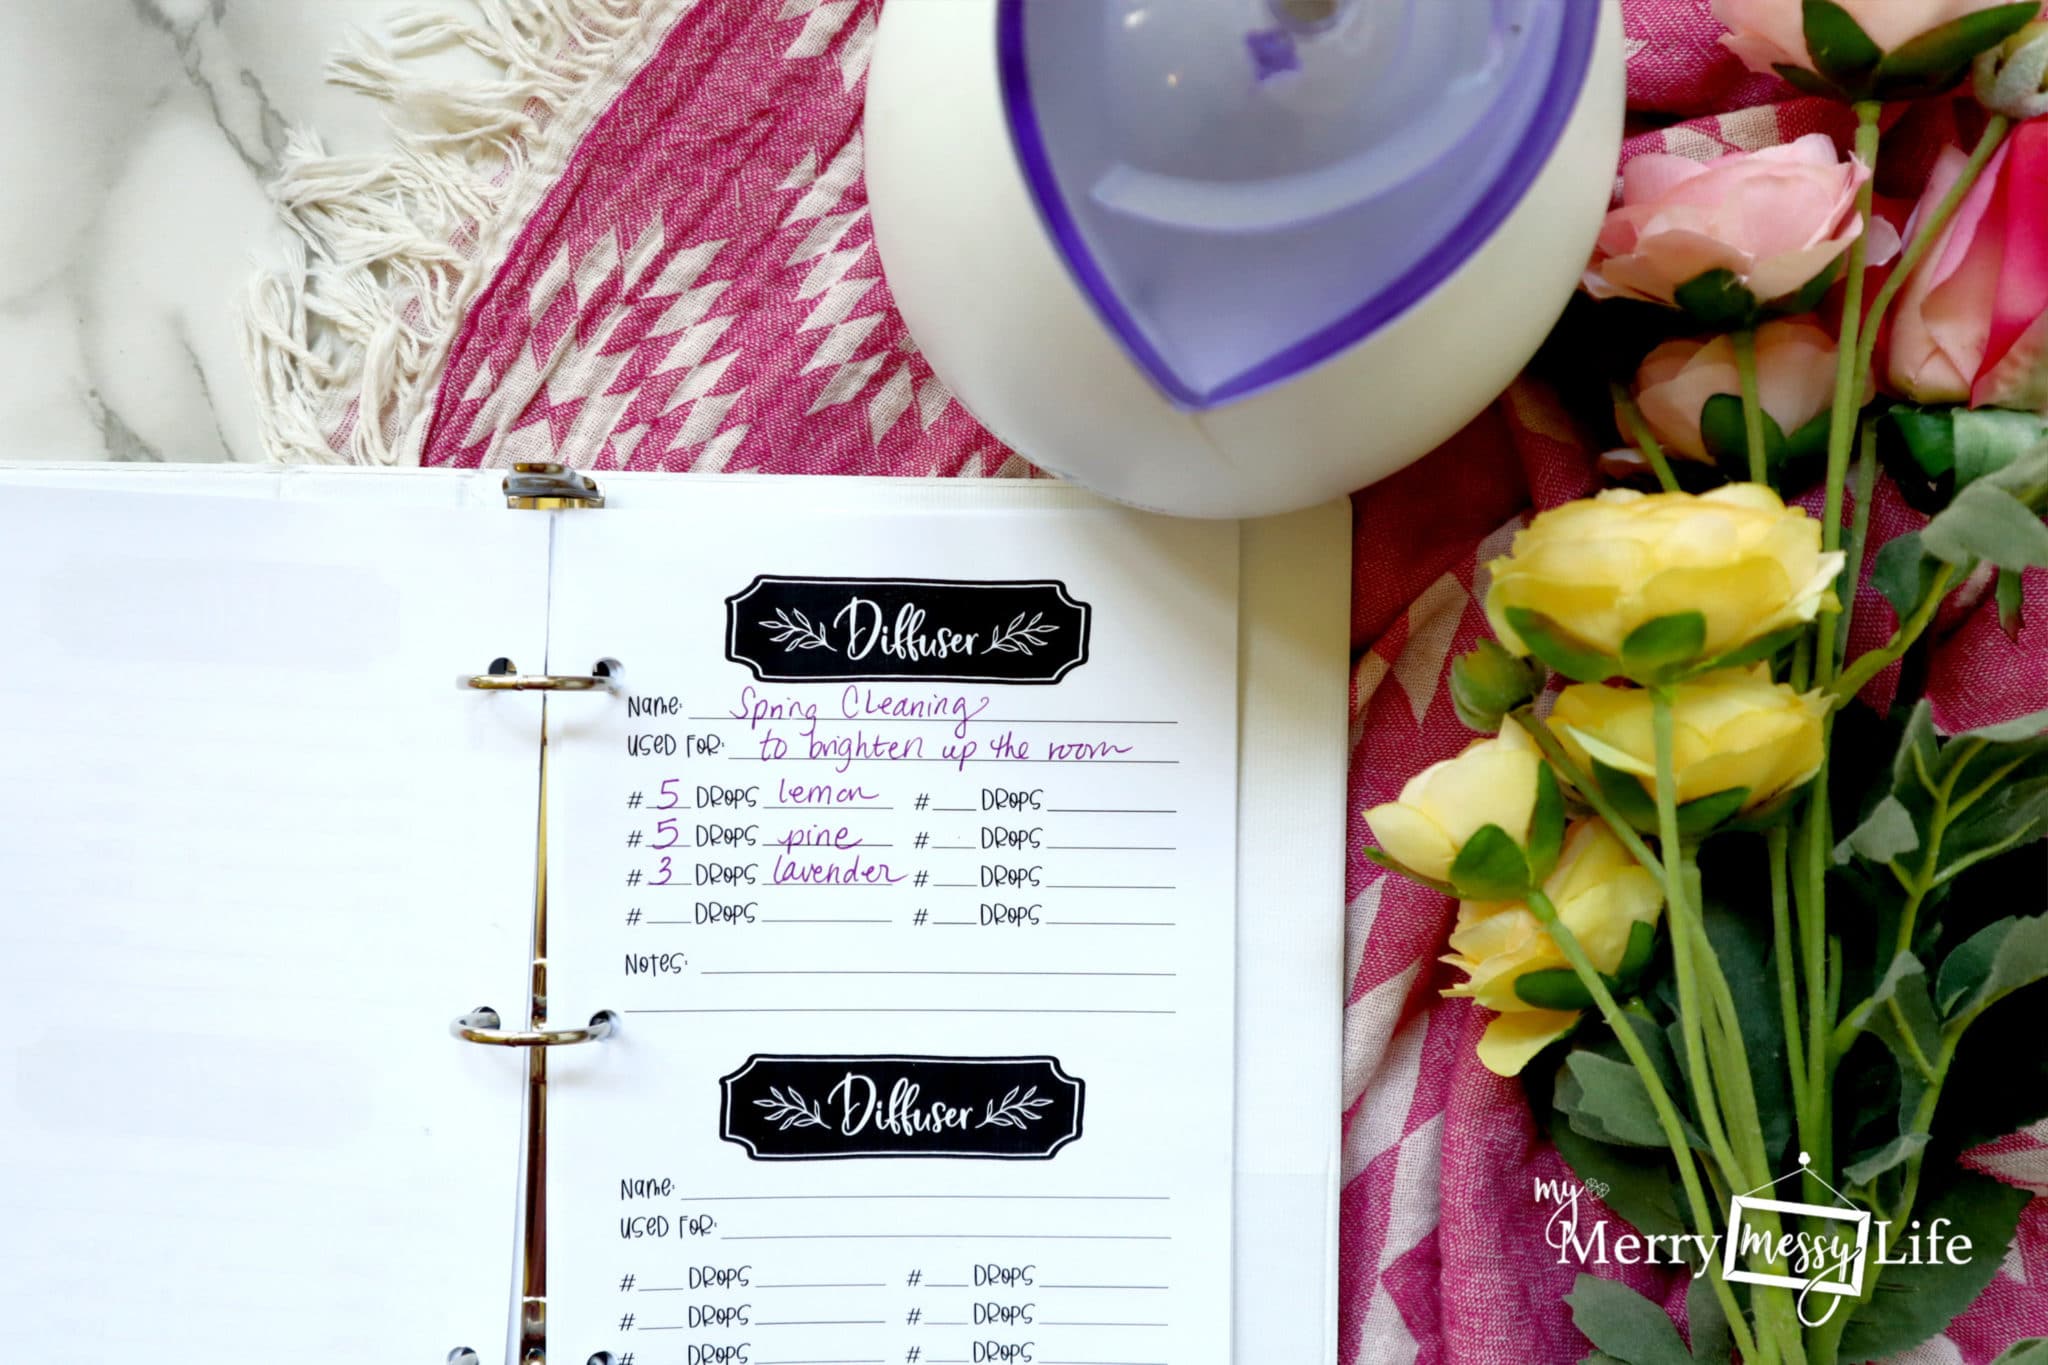 Essential Oils Journal - keep track of your diffuser recipes easily